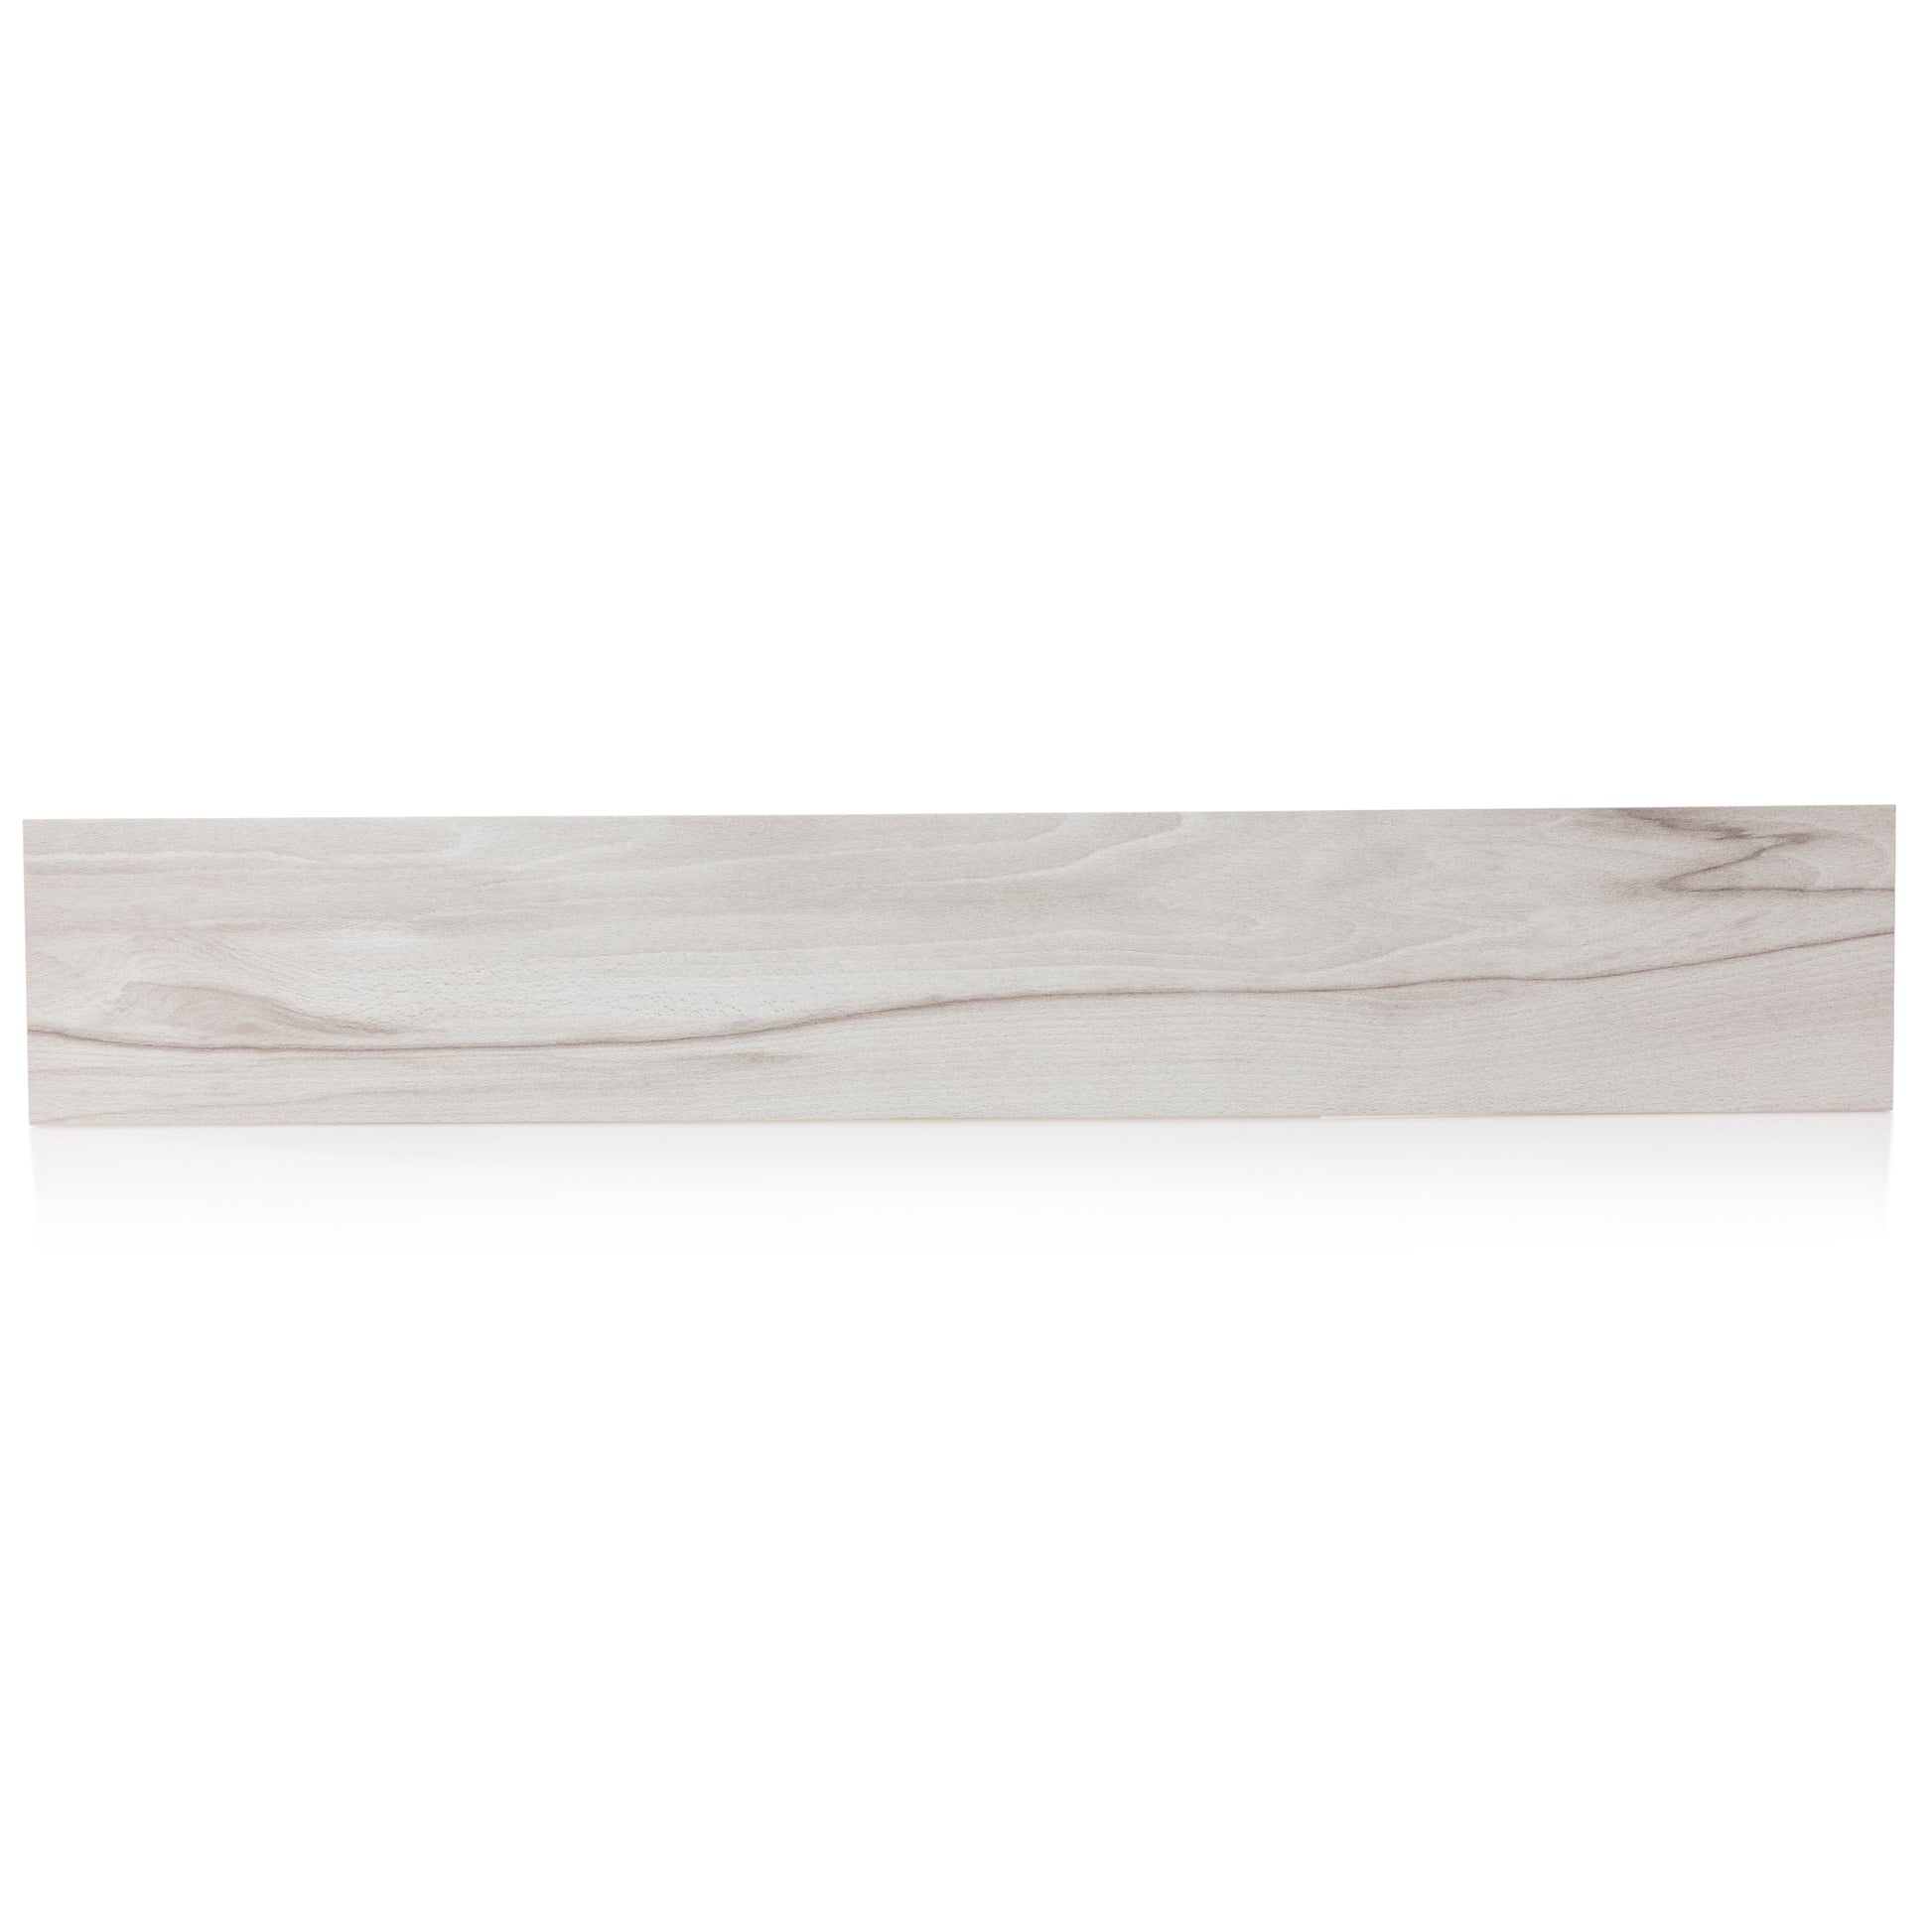 8x48 American Wood White (12.65 sq ft/ 5 pc case) - Industry Tile